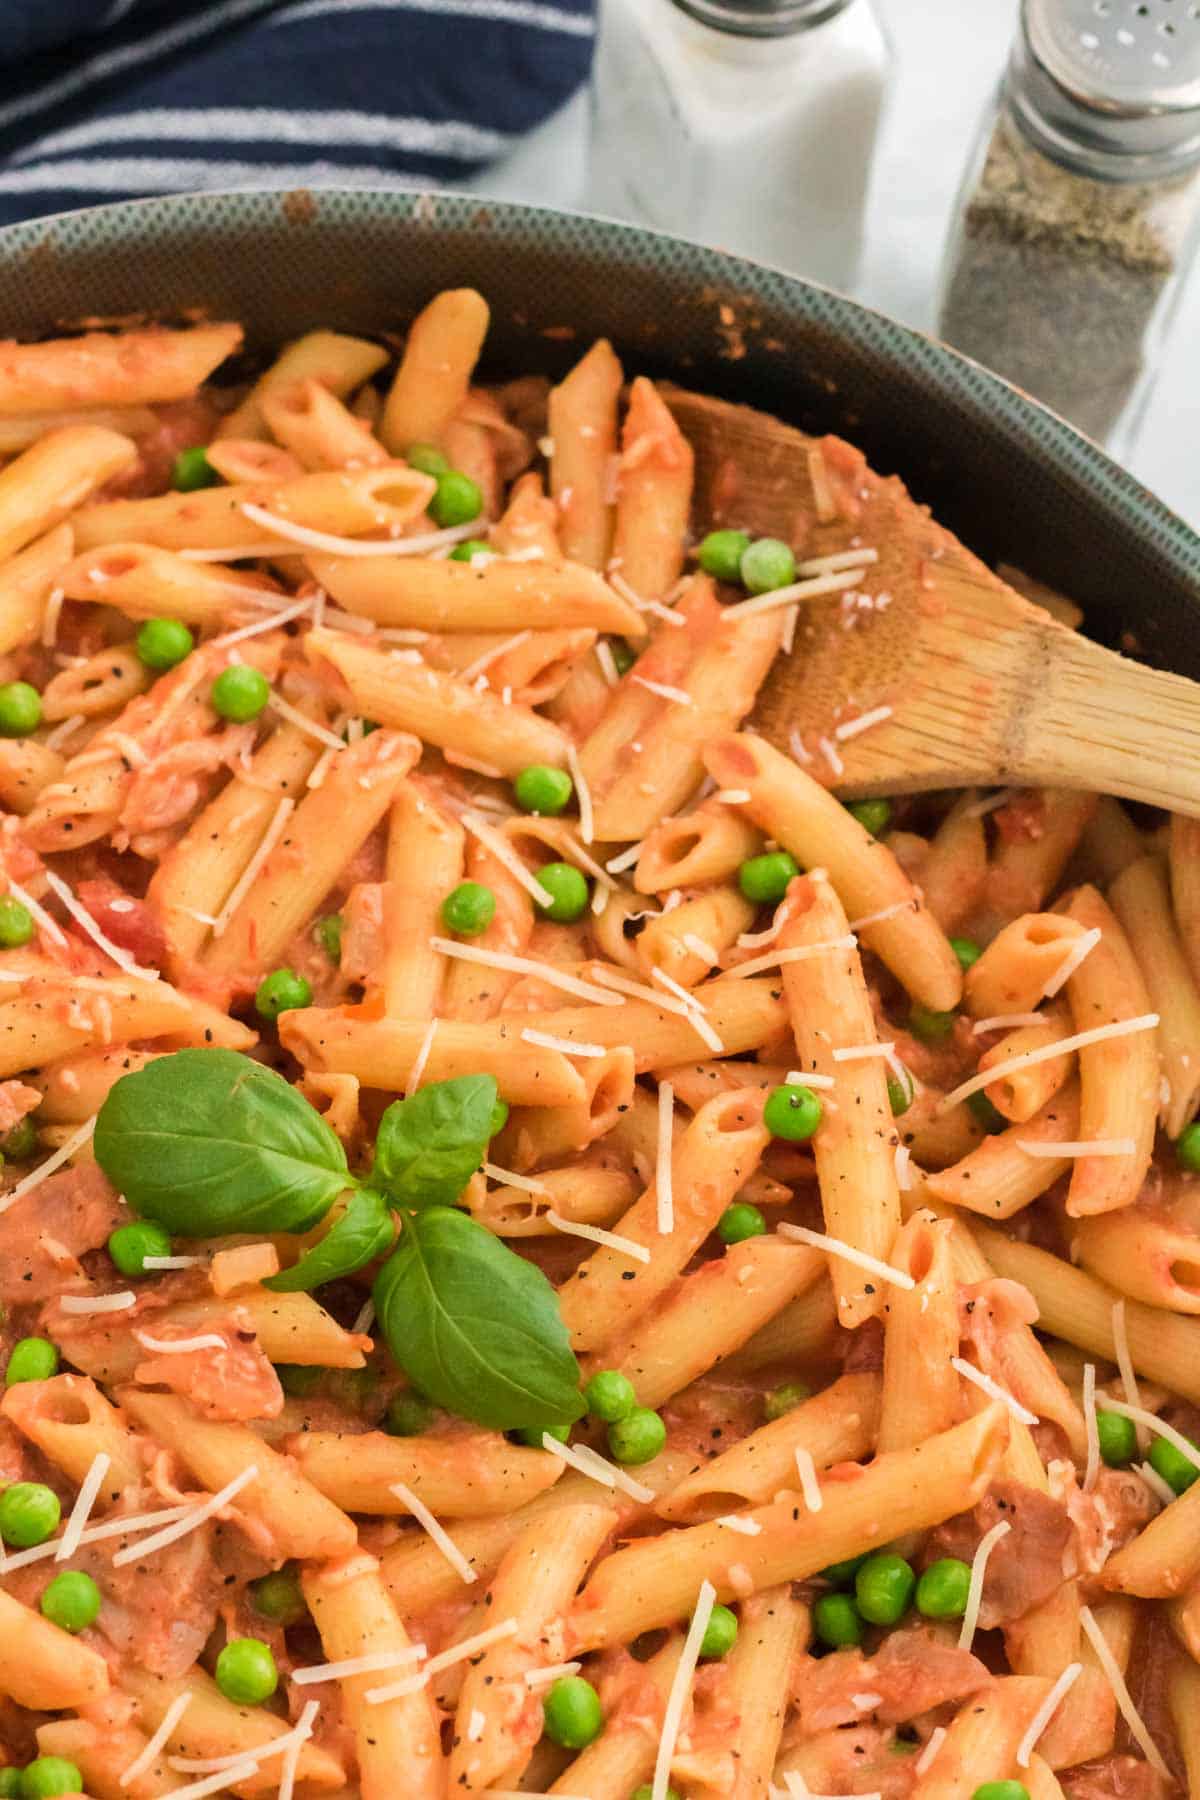 A pan of penne with tomato cream sauce, with a wooden spoon.